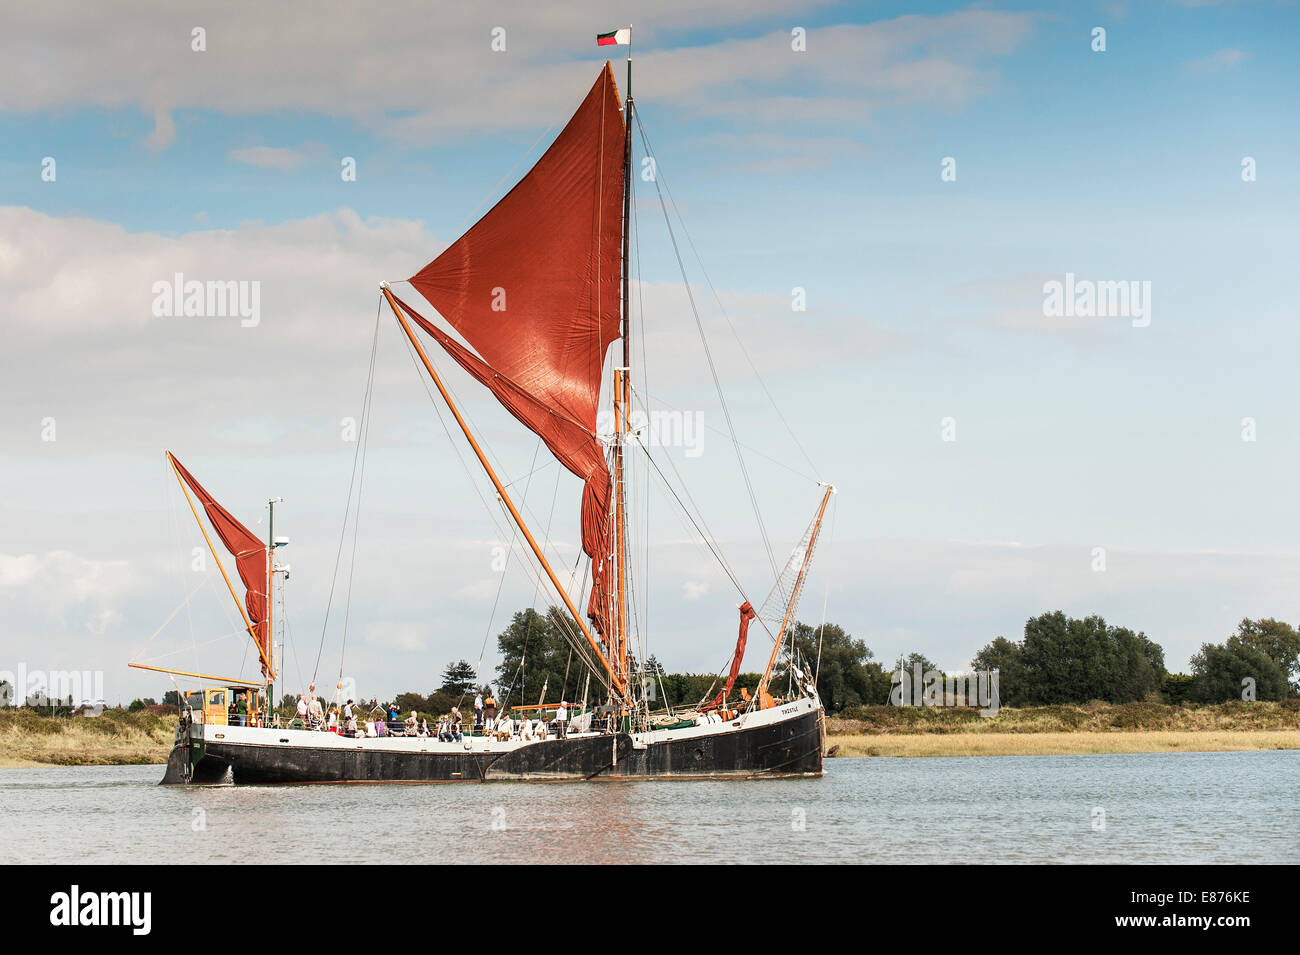 The Sailing Barge ;Thistle' on the Blackwater River in Essex. Stock Photo